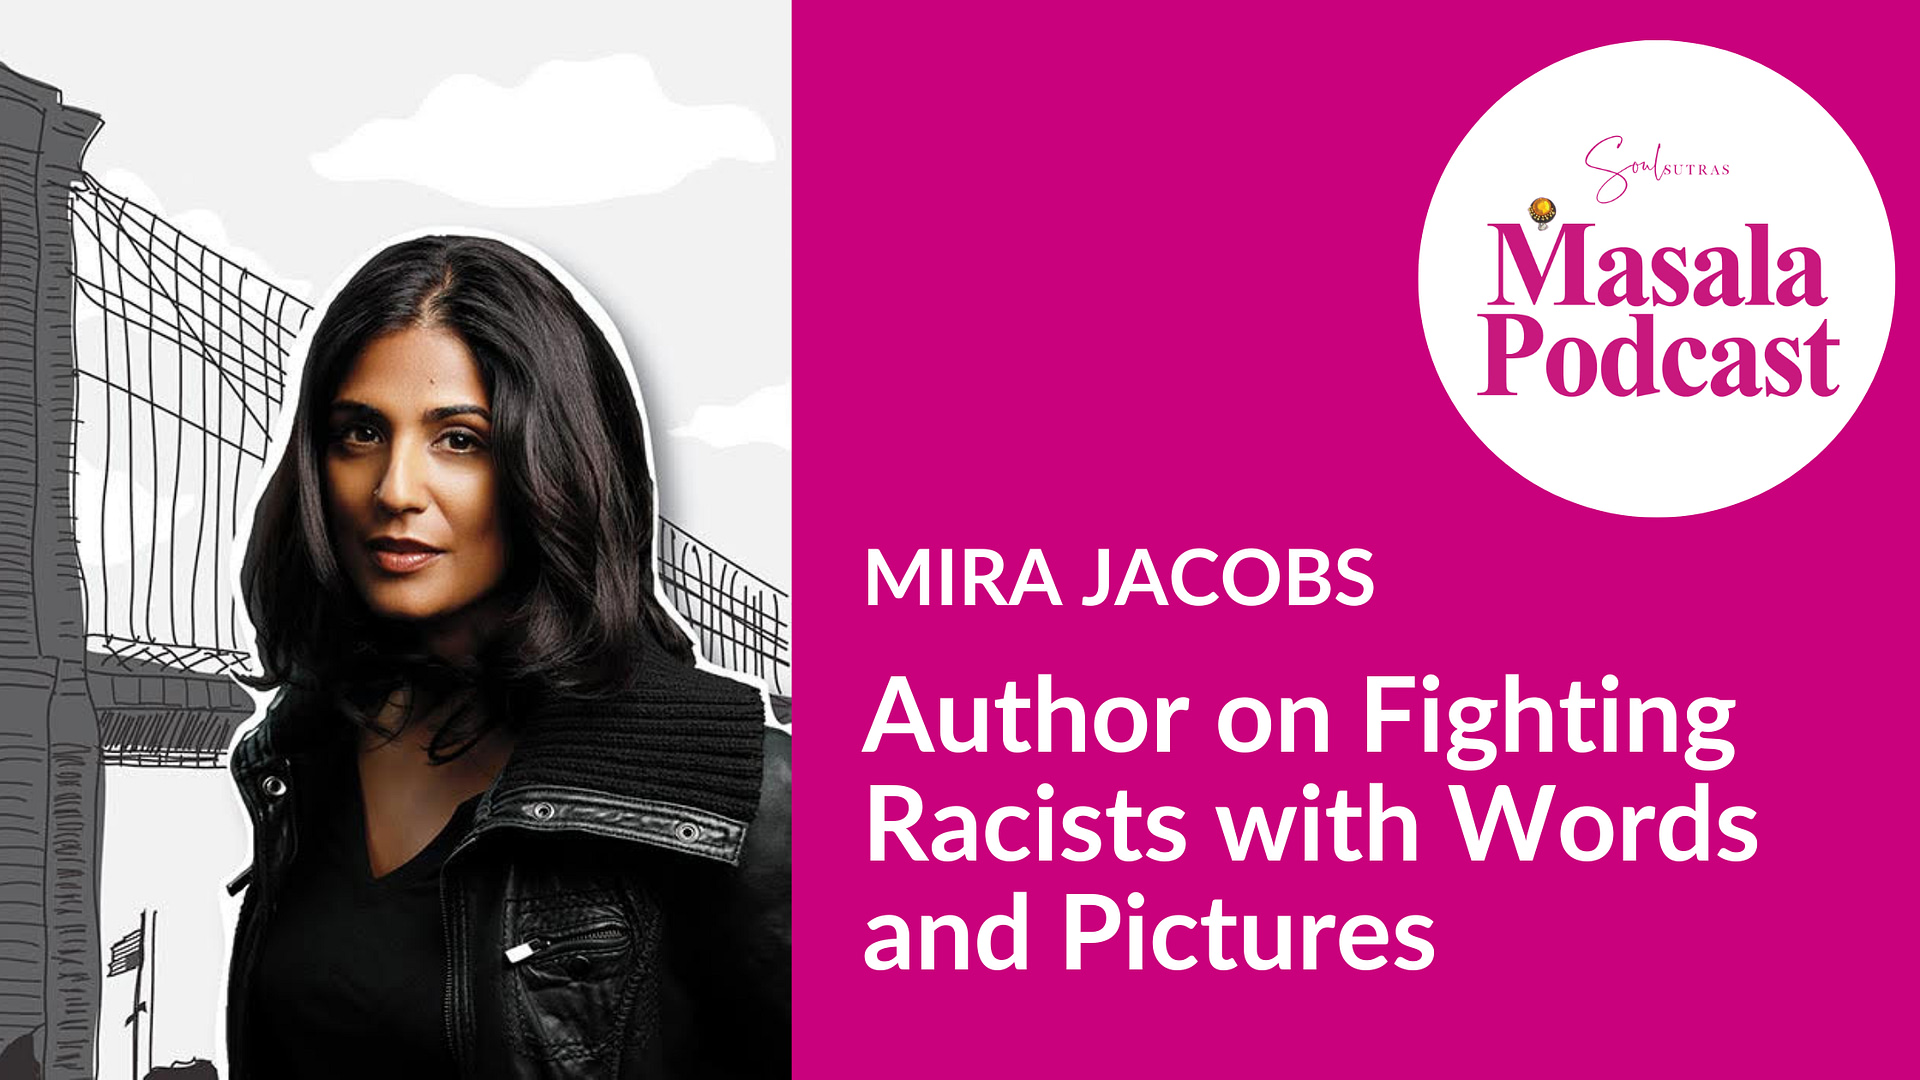 Mira Jacob talks about racism on Masala Podcast, the top South Asian feminist podcast